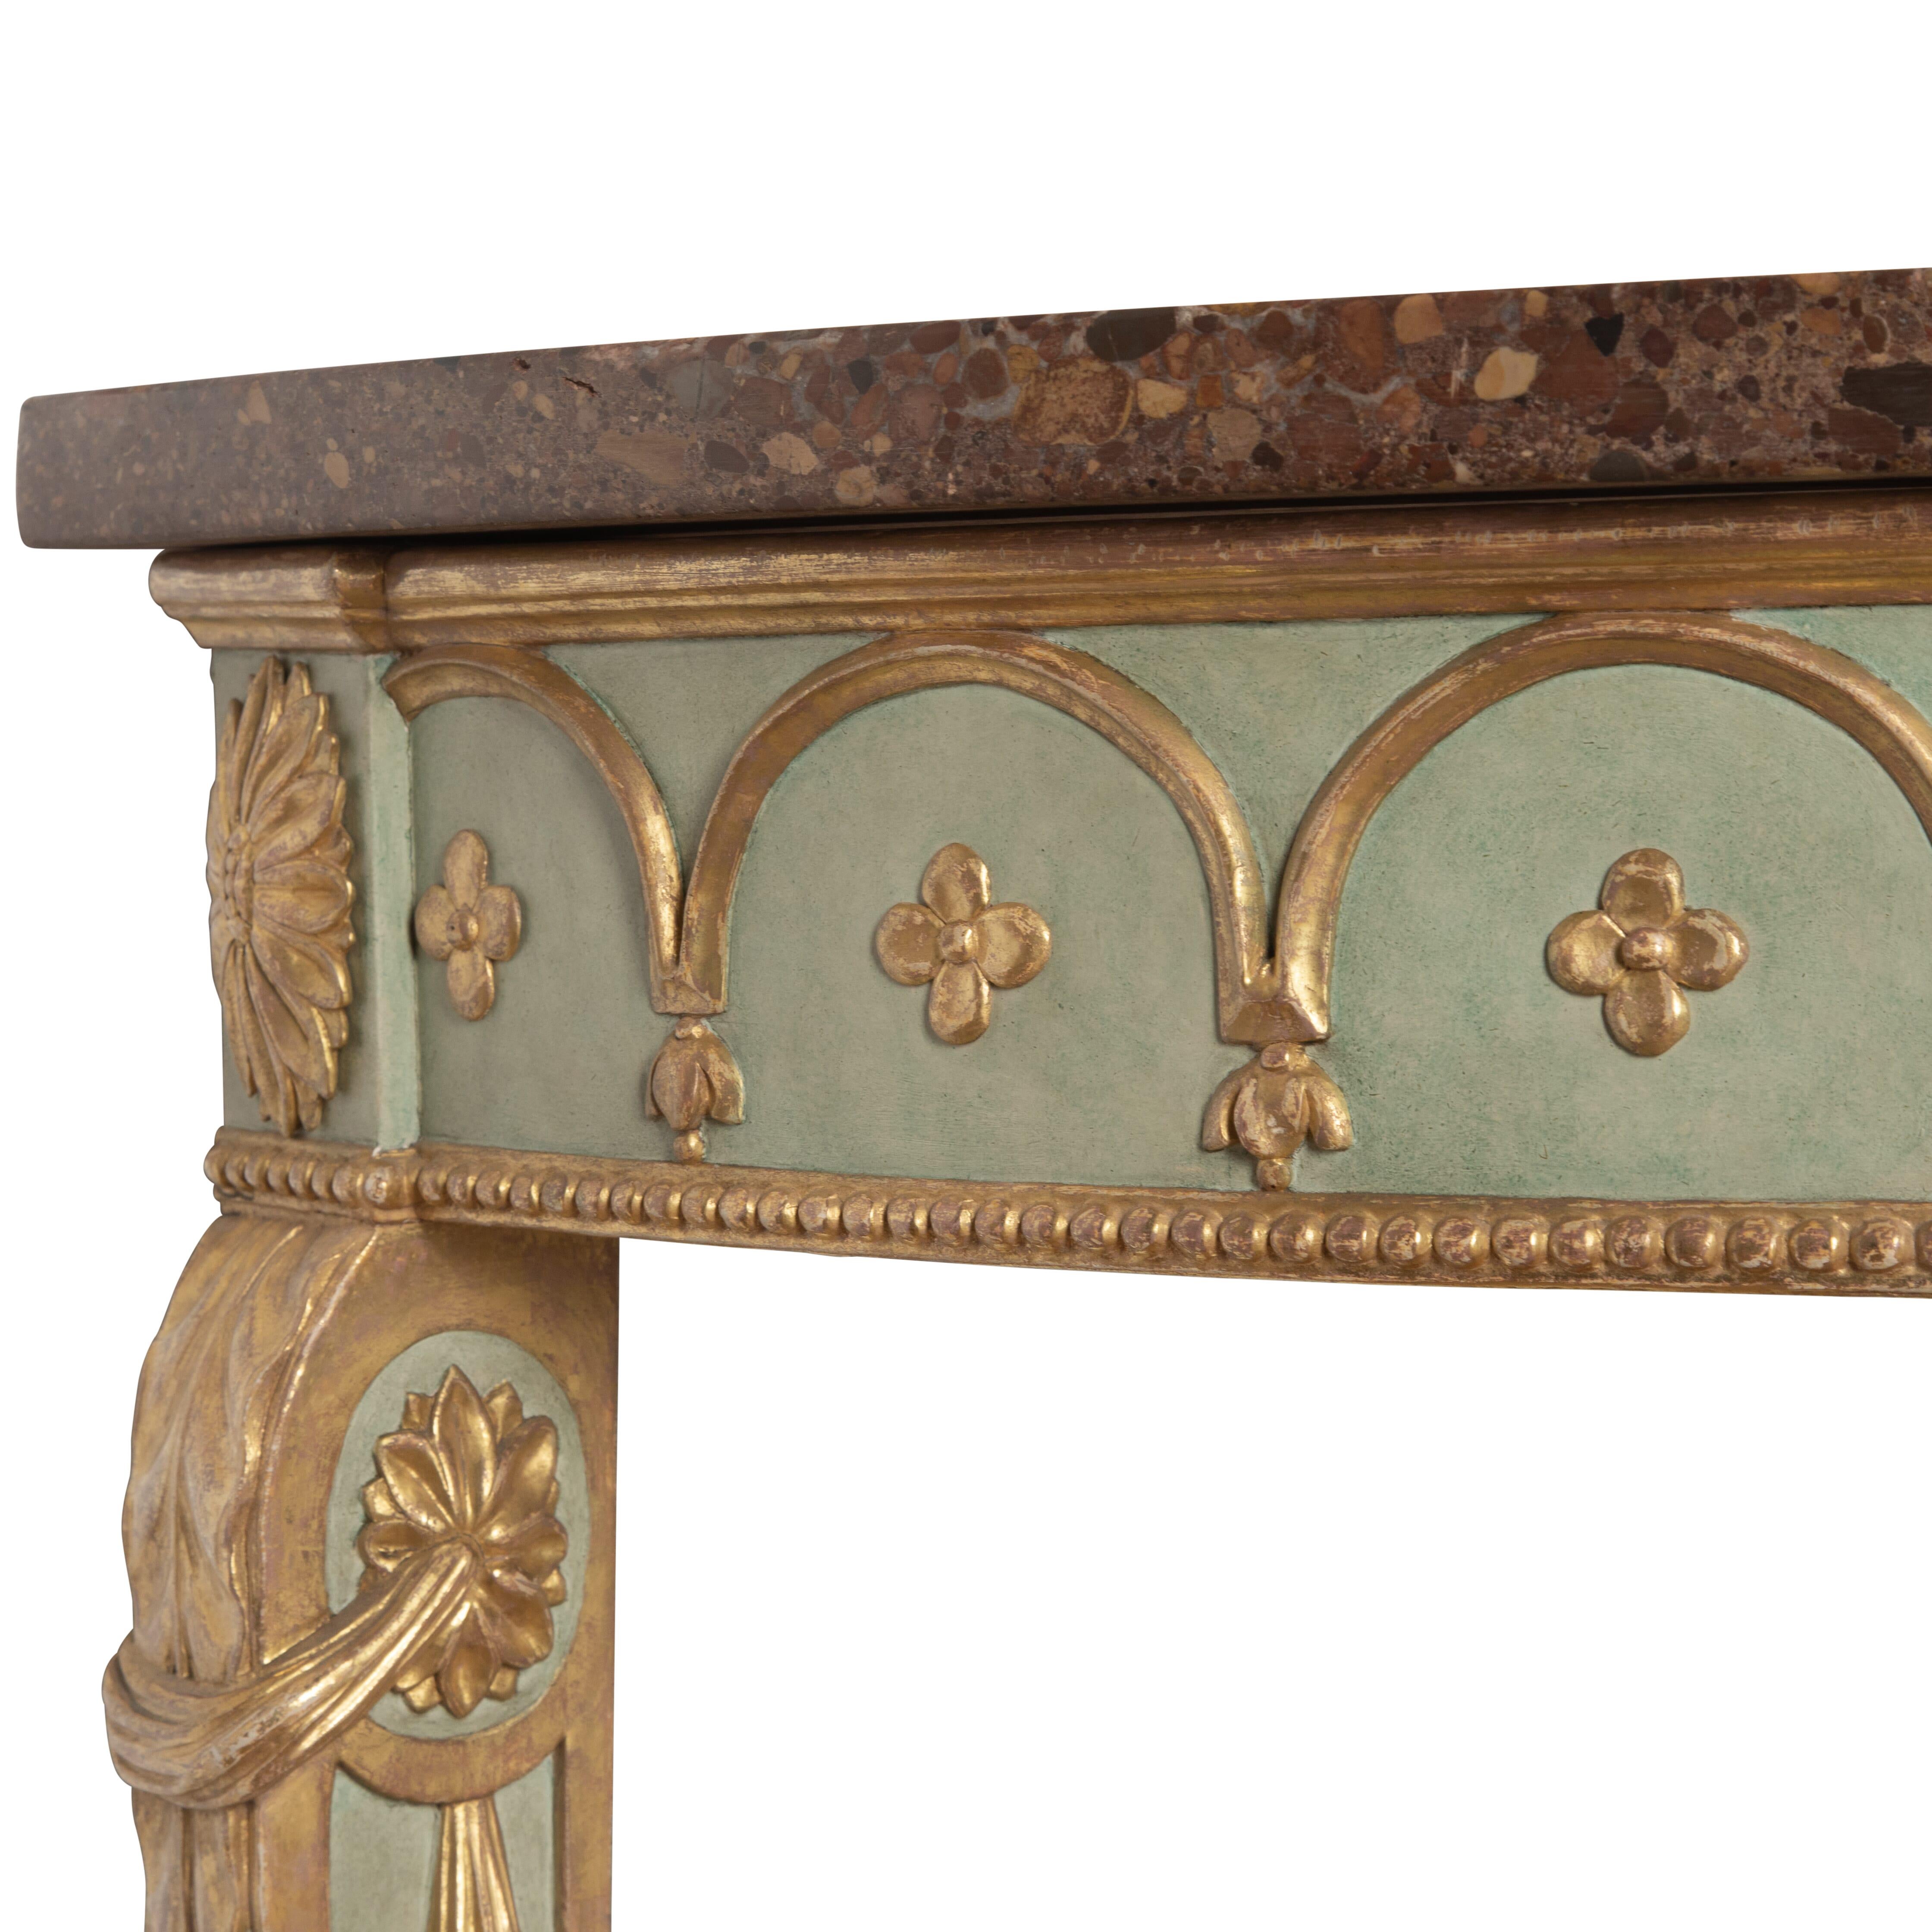 ﻿ A fabulous mid C19th neo-classical semi elliptical carved giltwood console/side table, finished in gilt and colourful decoration, after a design by Robert Adam. The colourful marble top with no breaks or damage, above a frieze with a carved arched